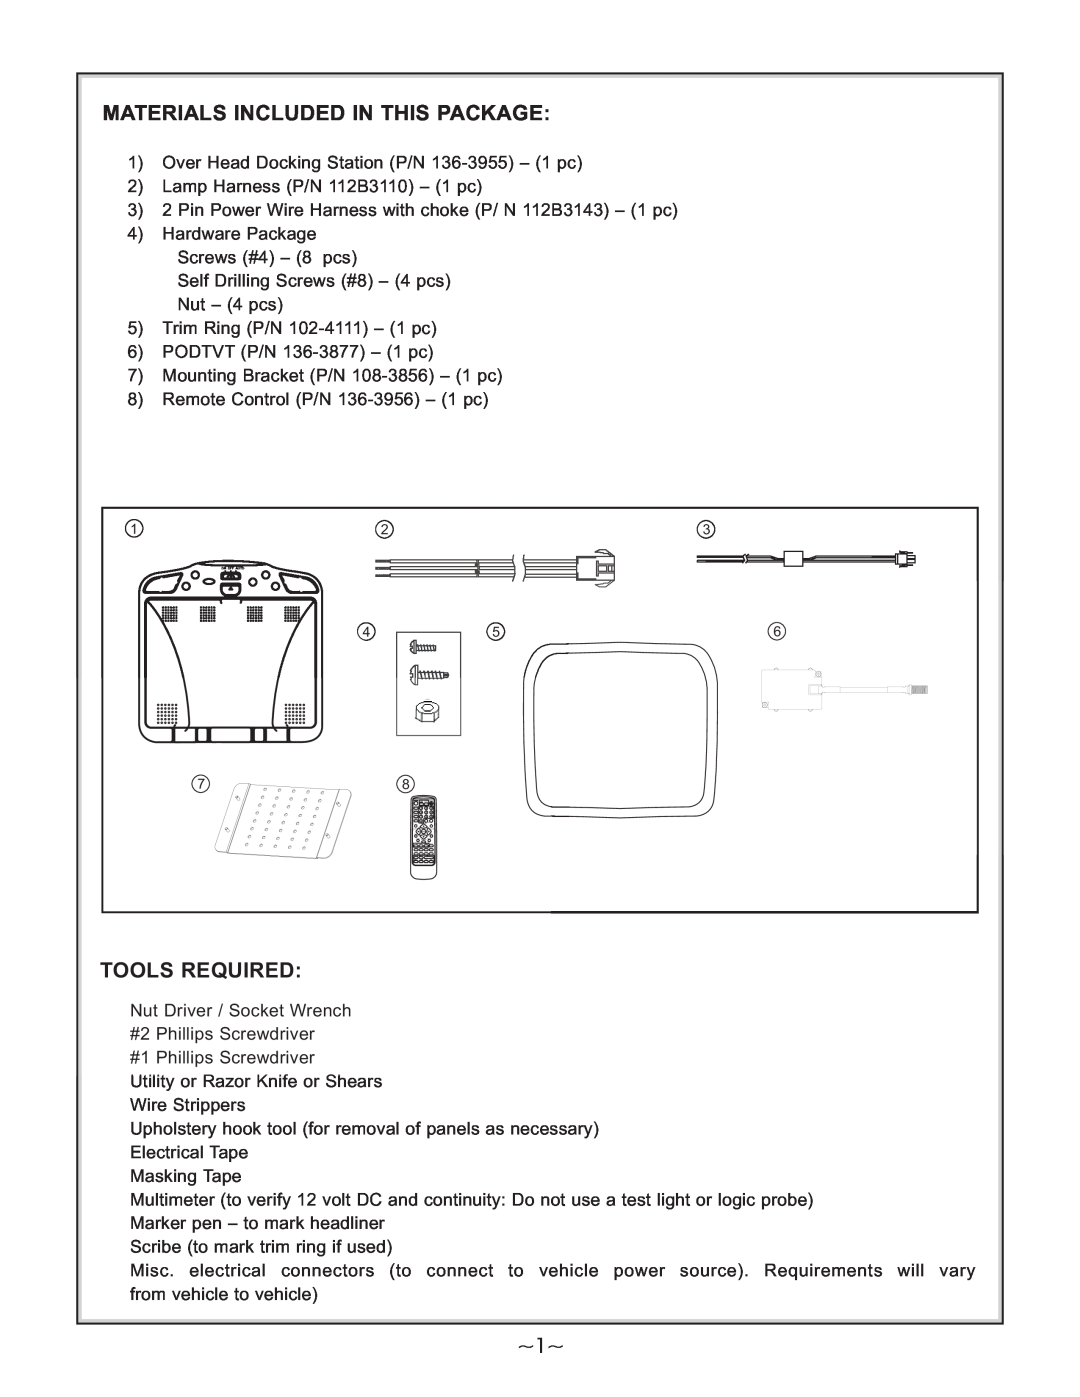 Audiovox VDS102T manual Materials Included In This Package, Tools Required 